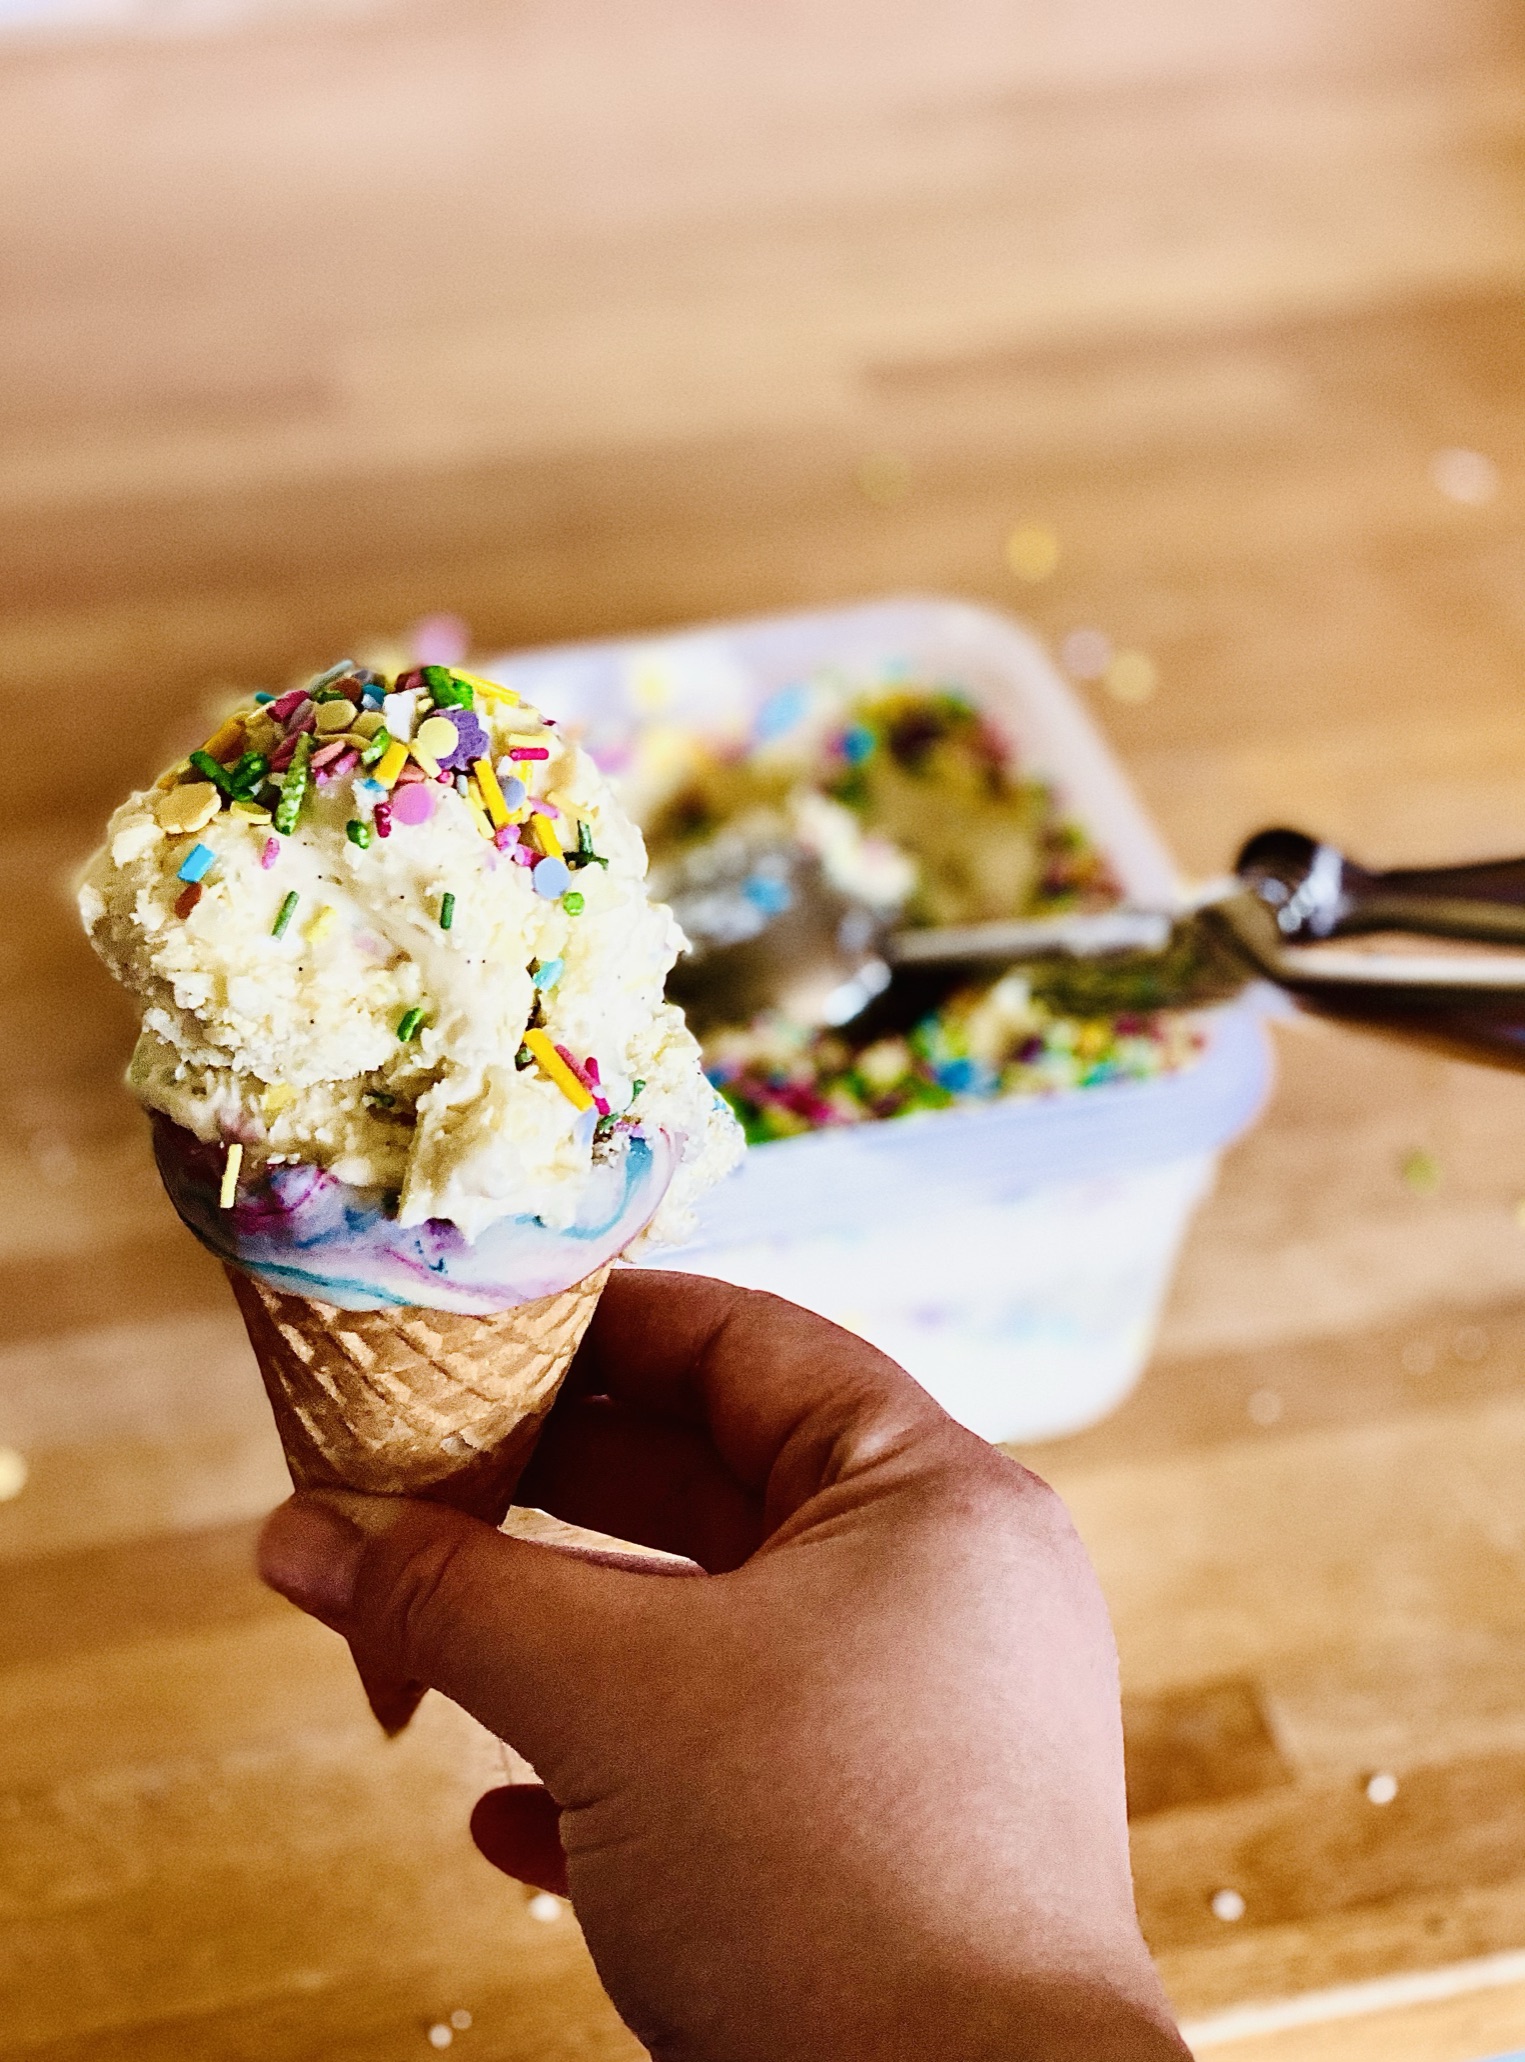 A scoop of white chocolate sparkle ice cream in an ice cream cone decorated with melted white chocolate. The ice cream tub with remaining ice cream behind.